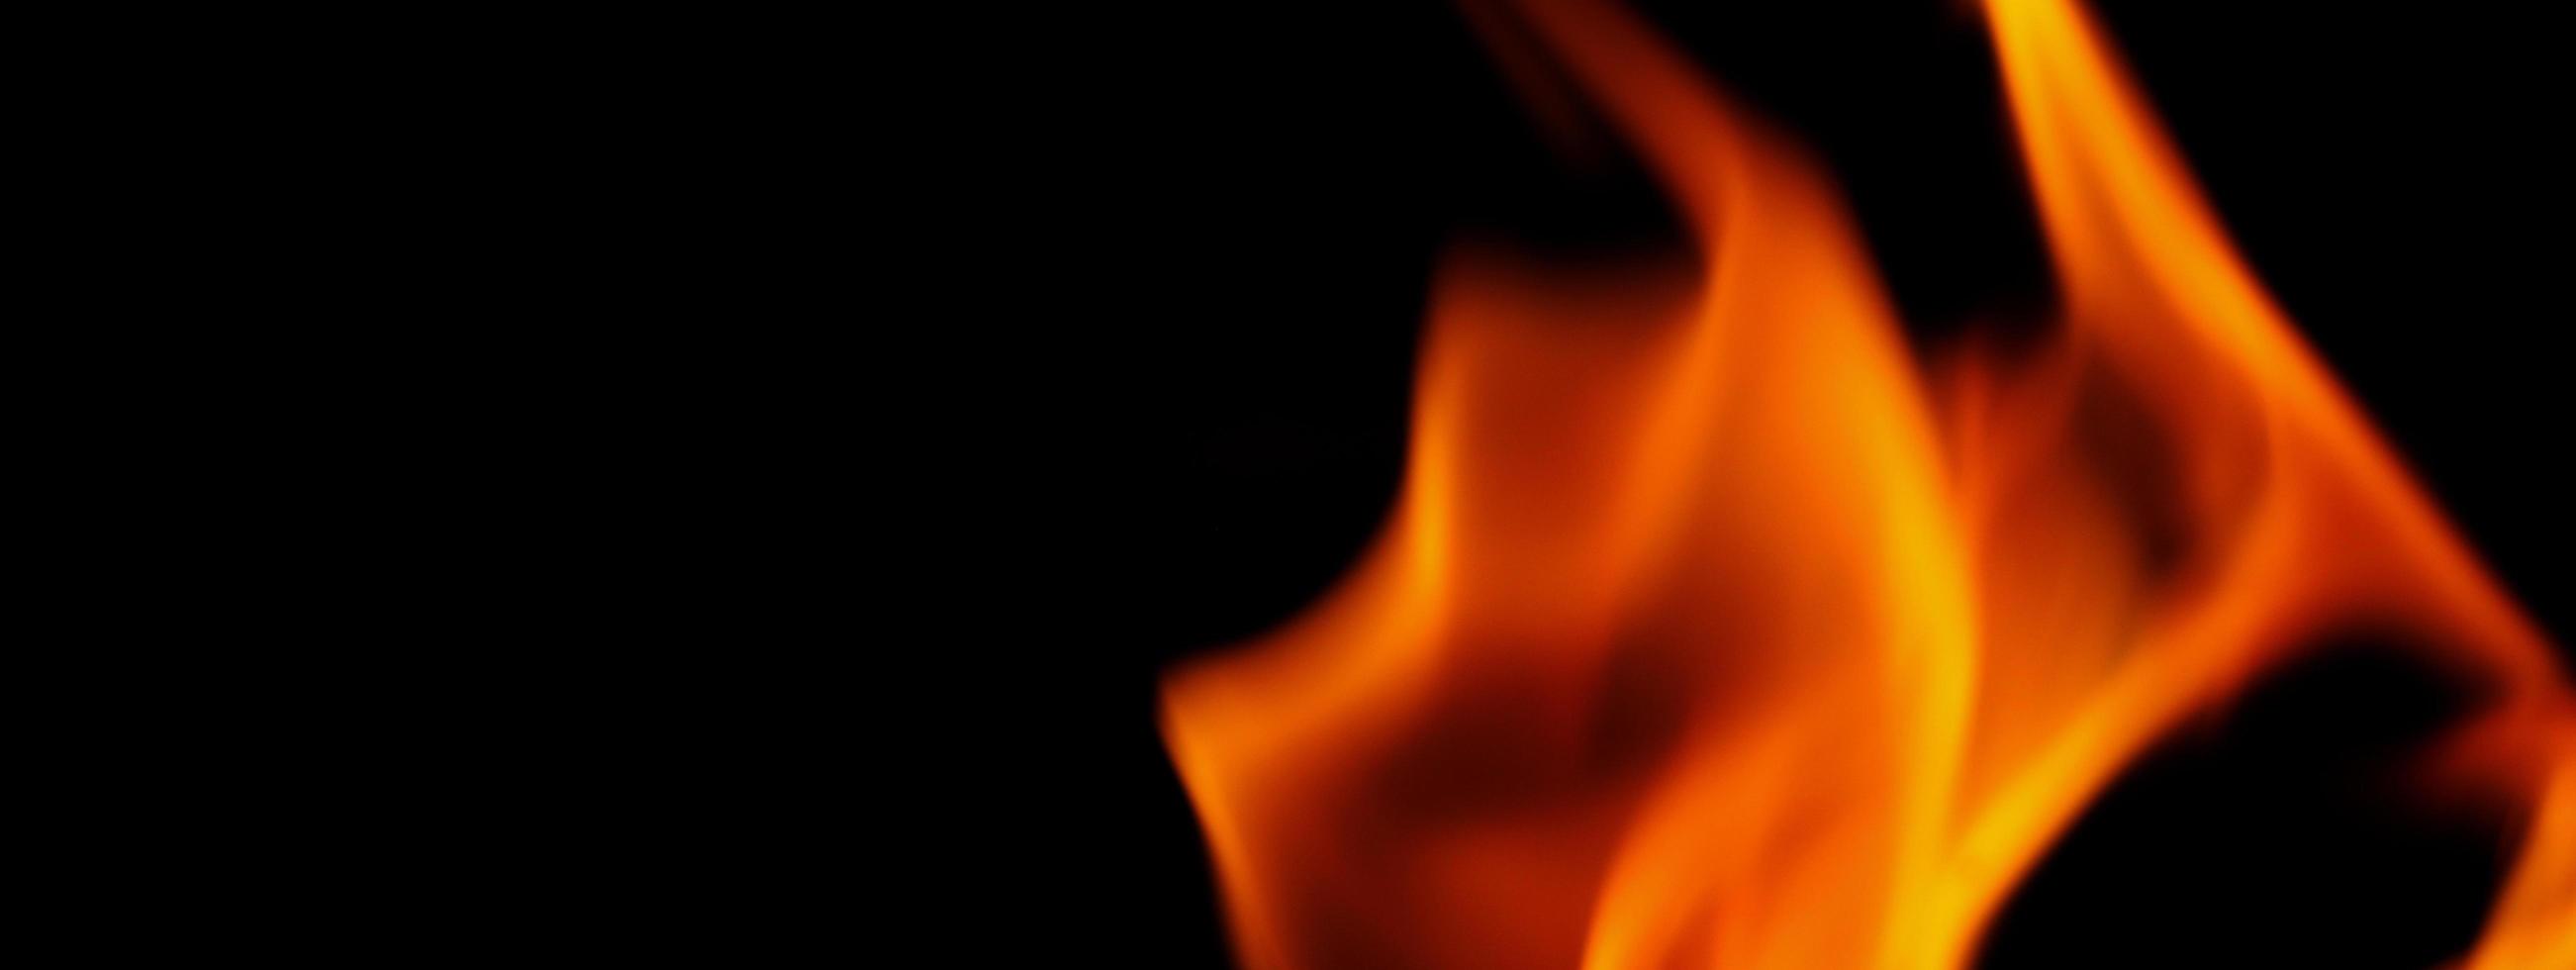 Fire background. Abstract burning flame and black background. photo